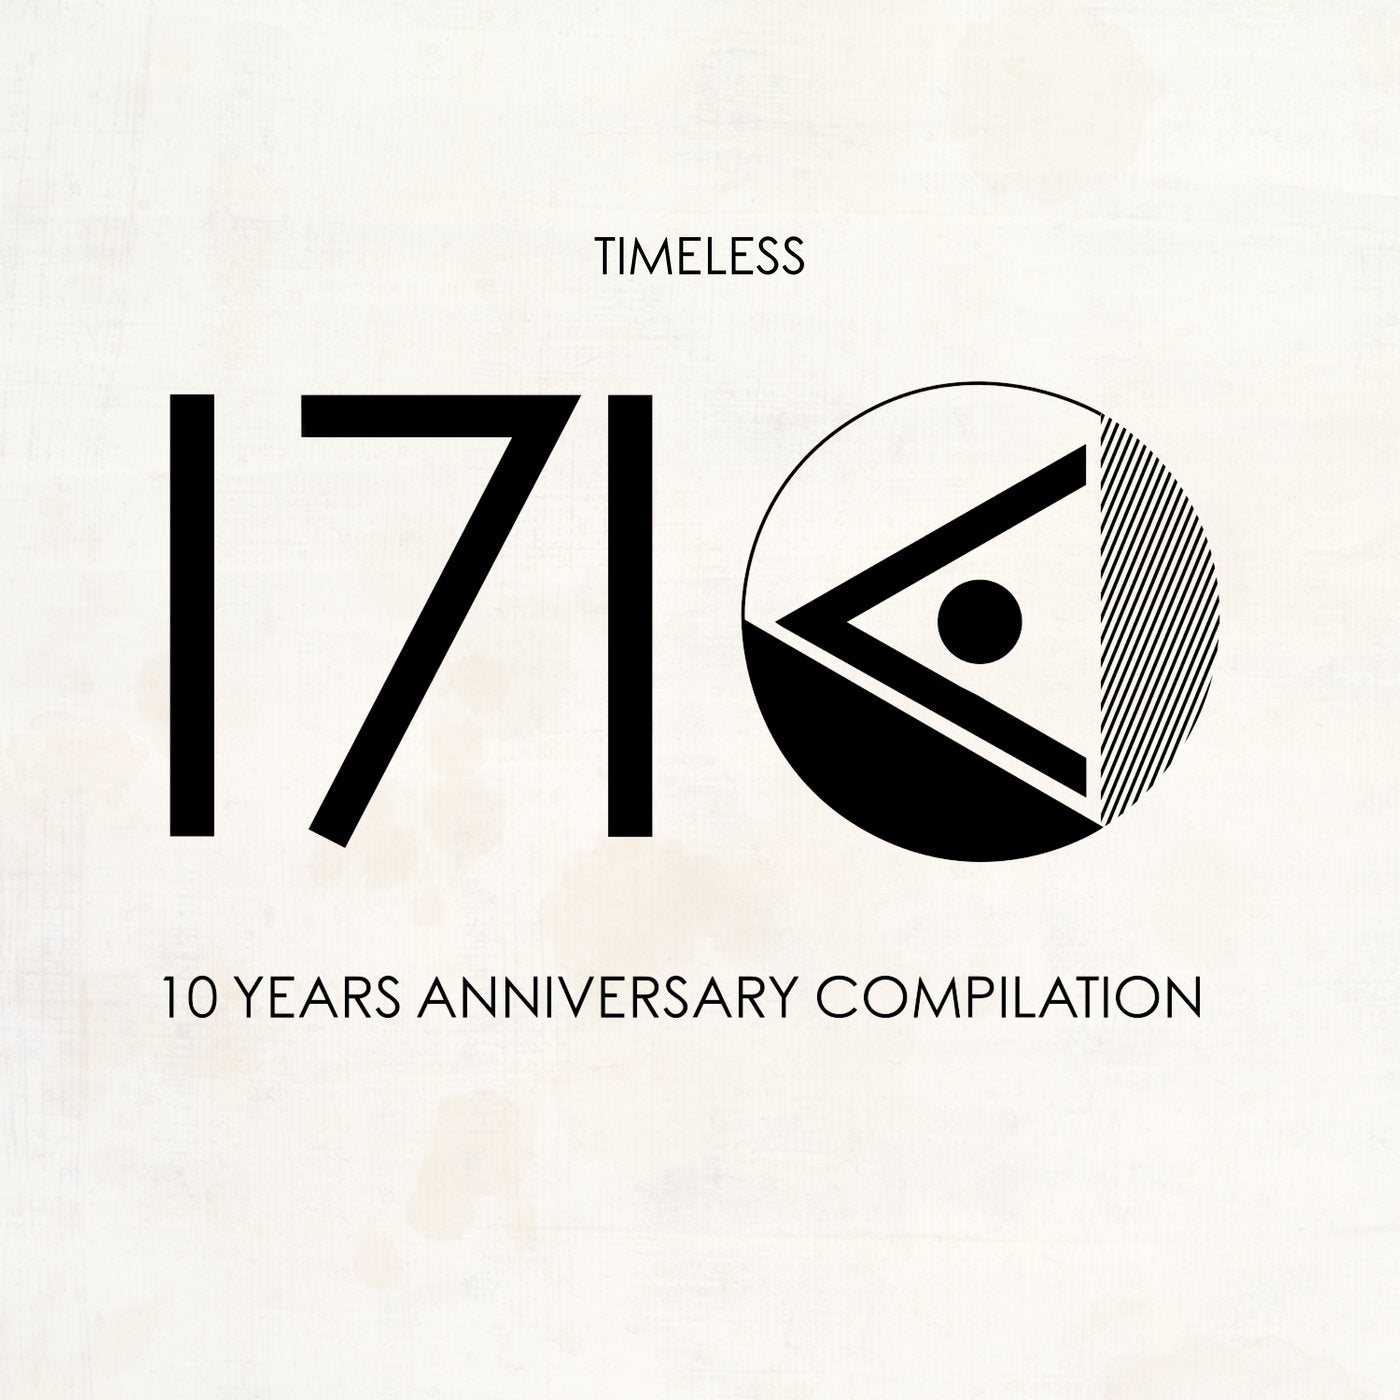 Timeless: 10 Years Anniversary Compilation